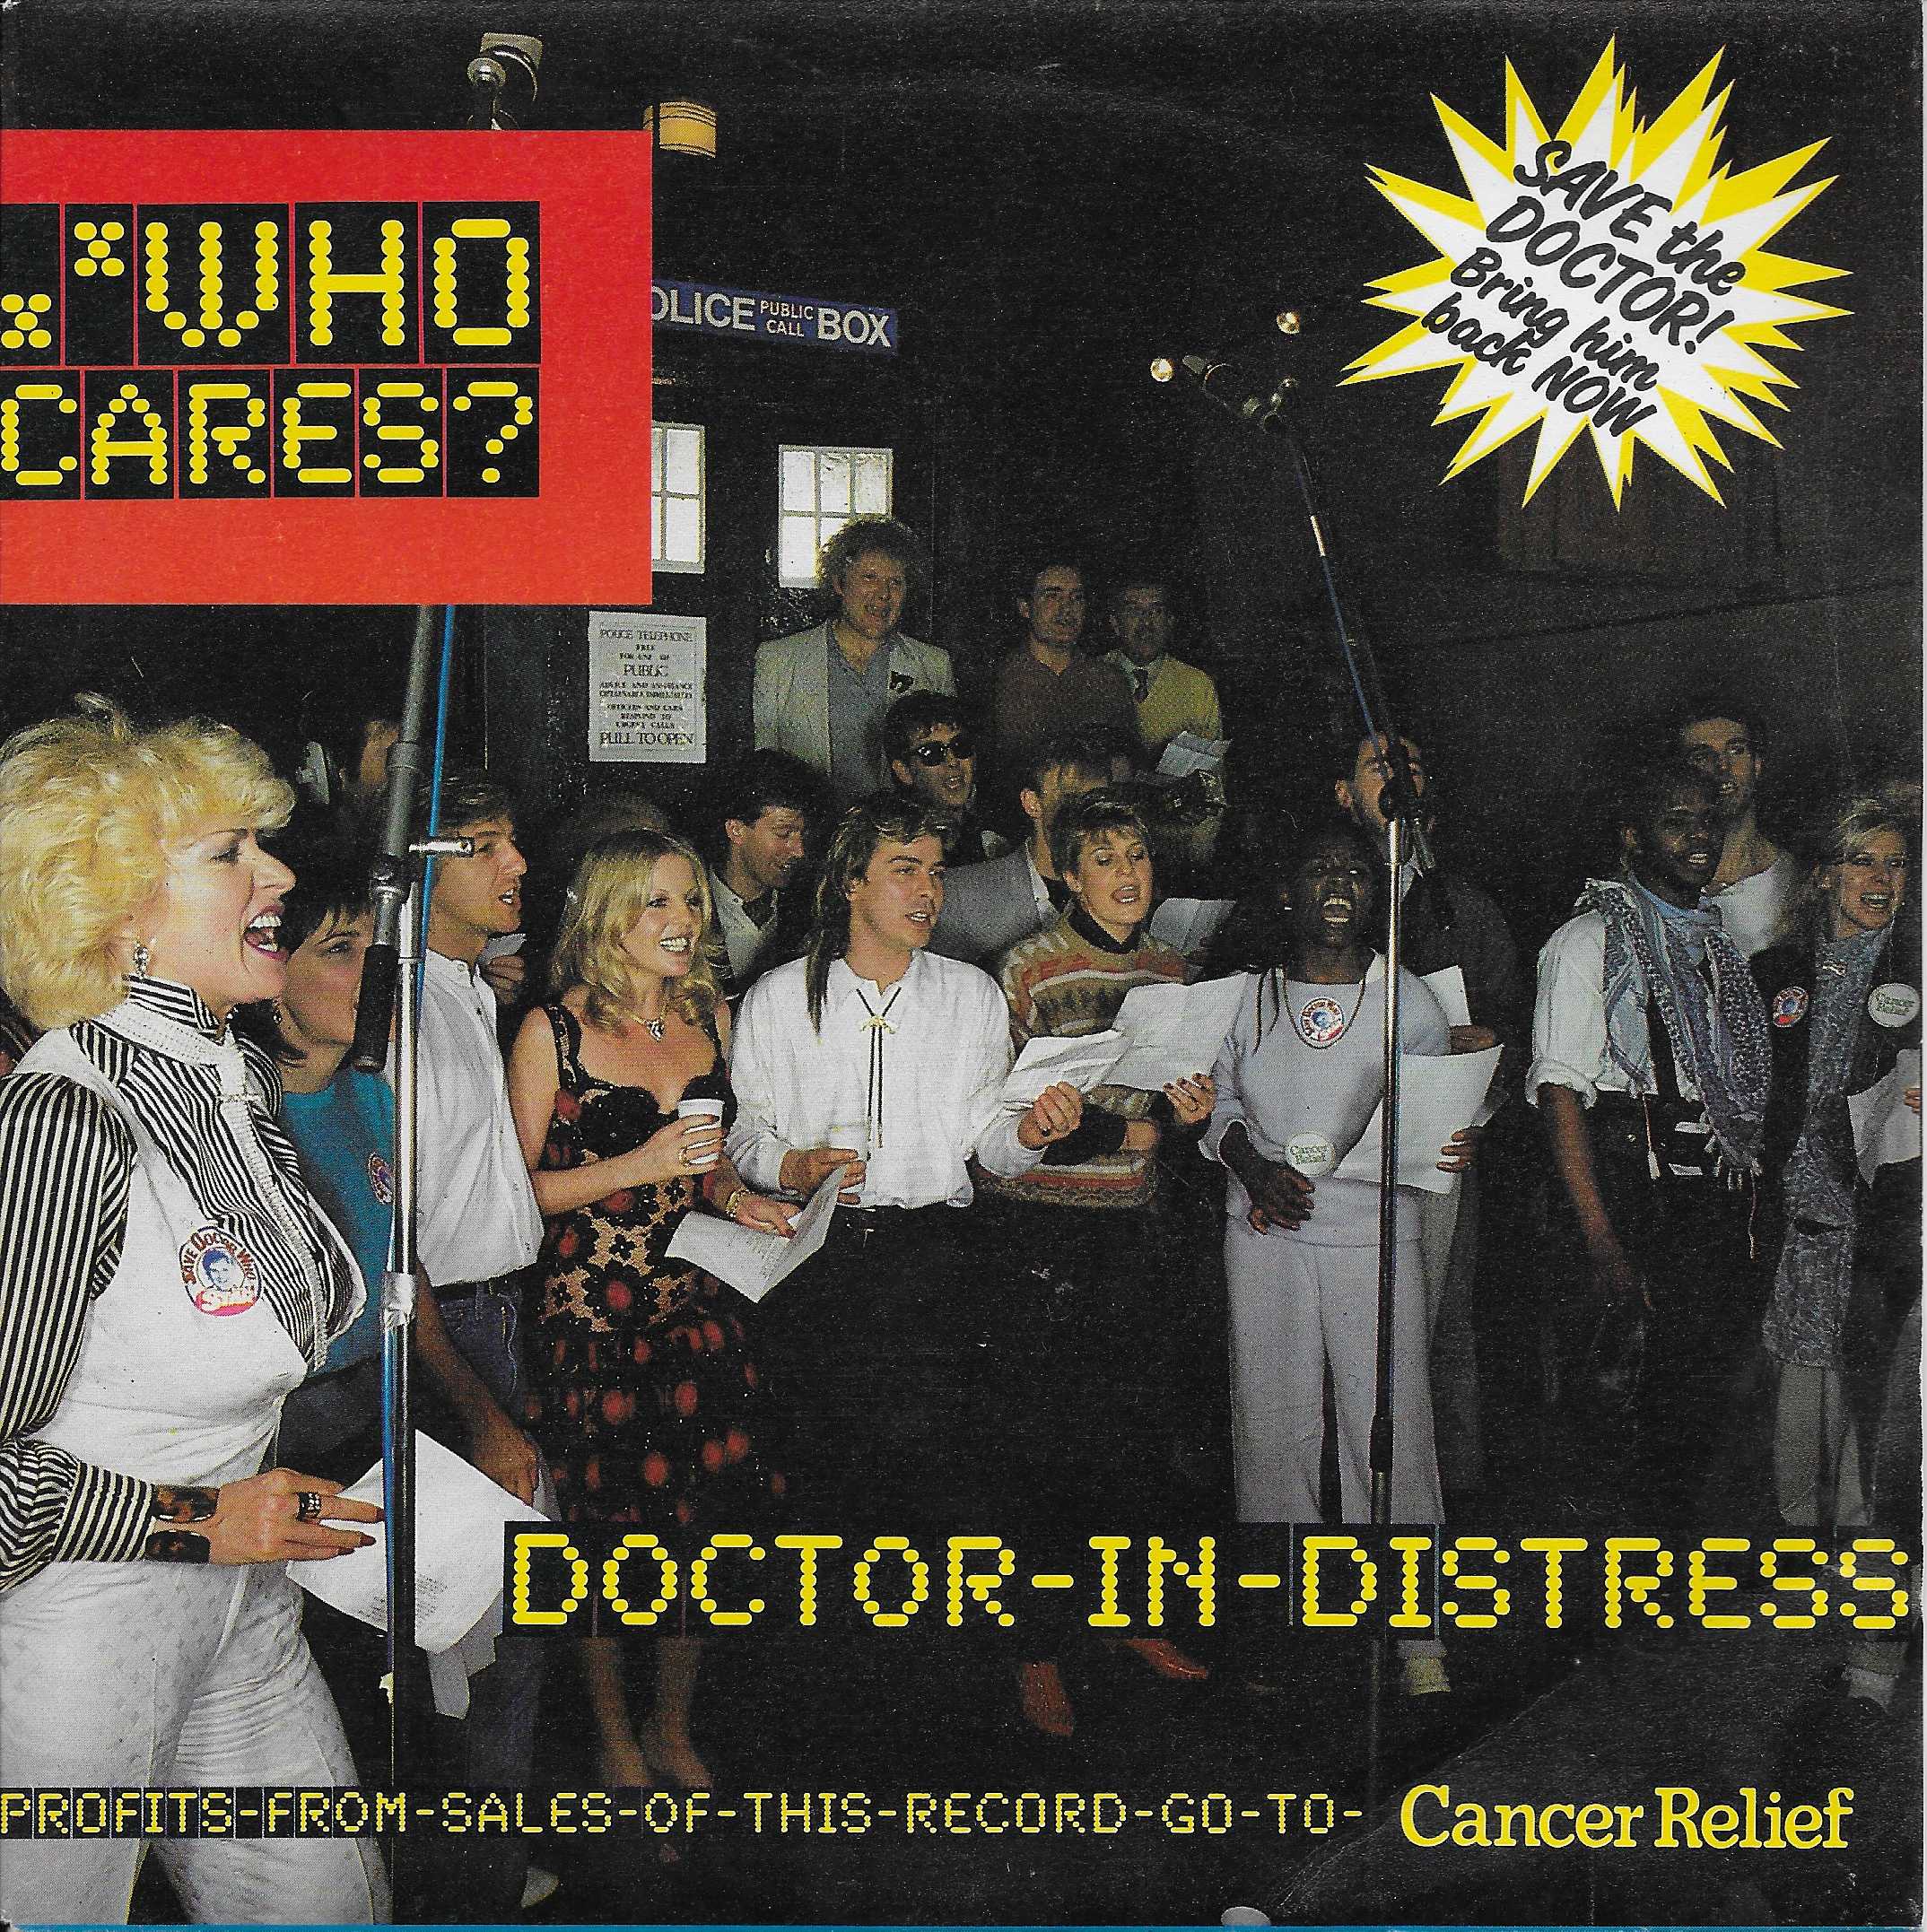 Picture of Doctor in distress by artist Ian Levine / Flachra Trench from the BBC singles - Records and Tapes library